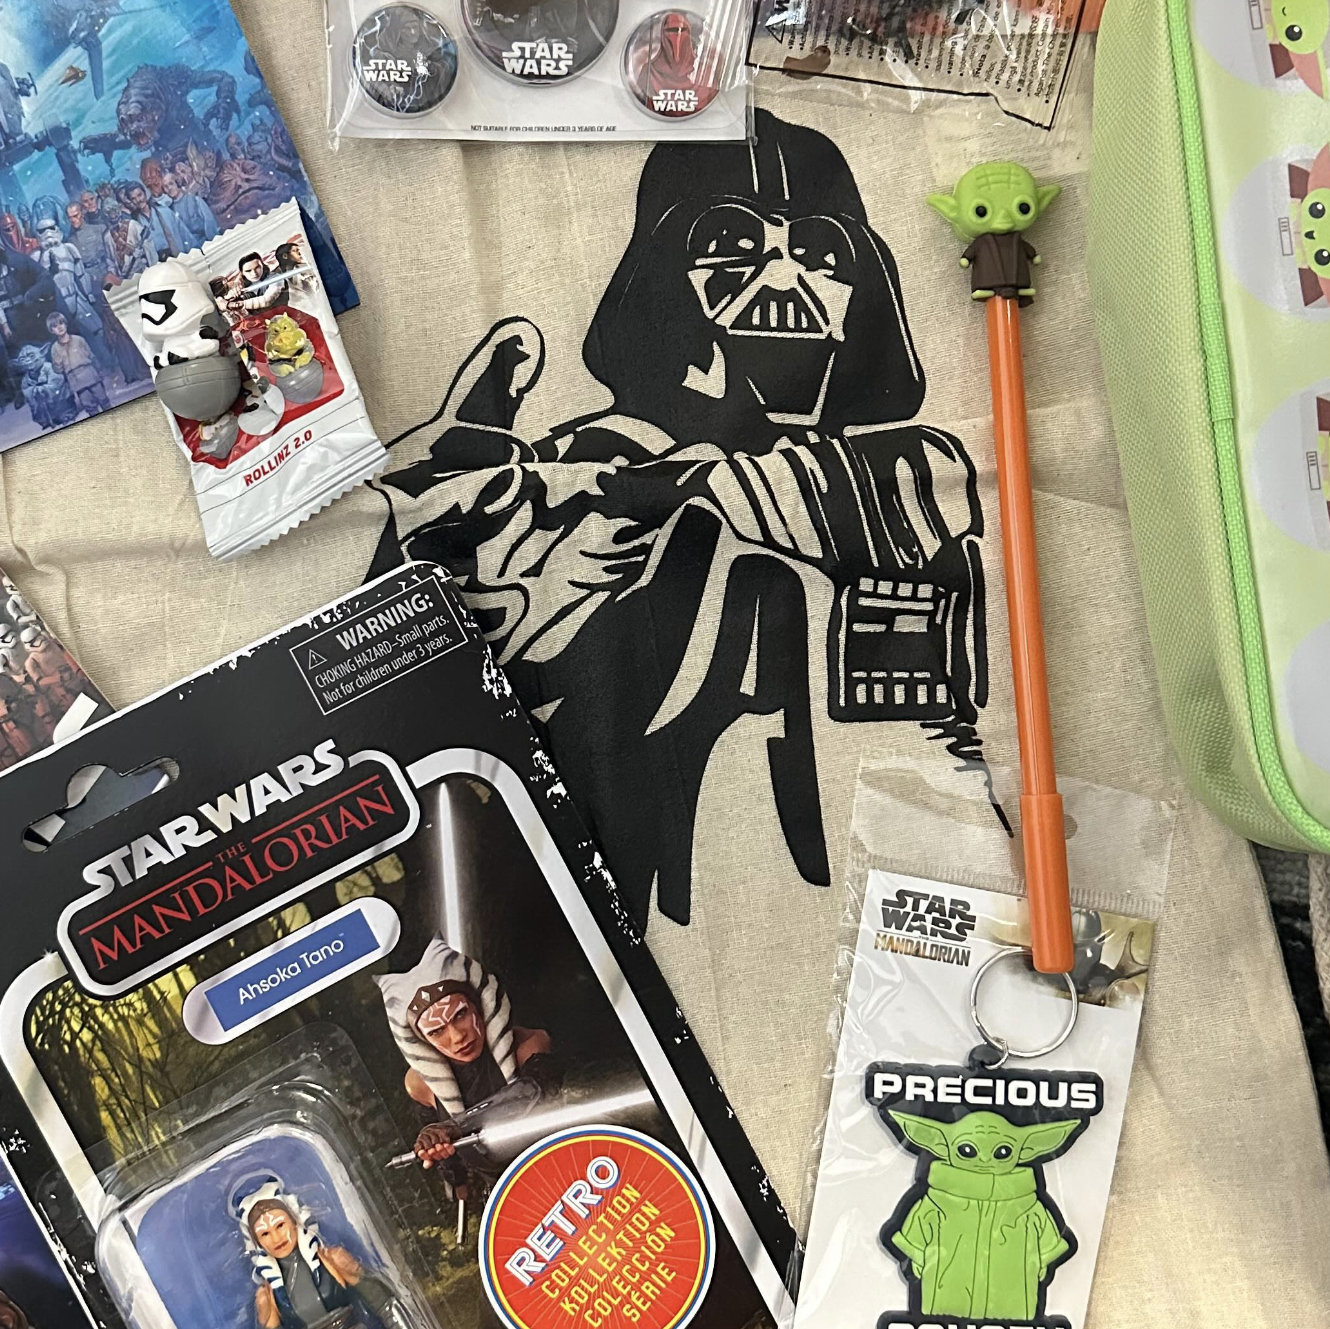 Smugglers Crate Subscription Box